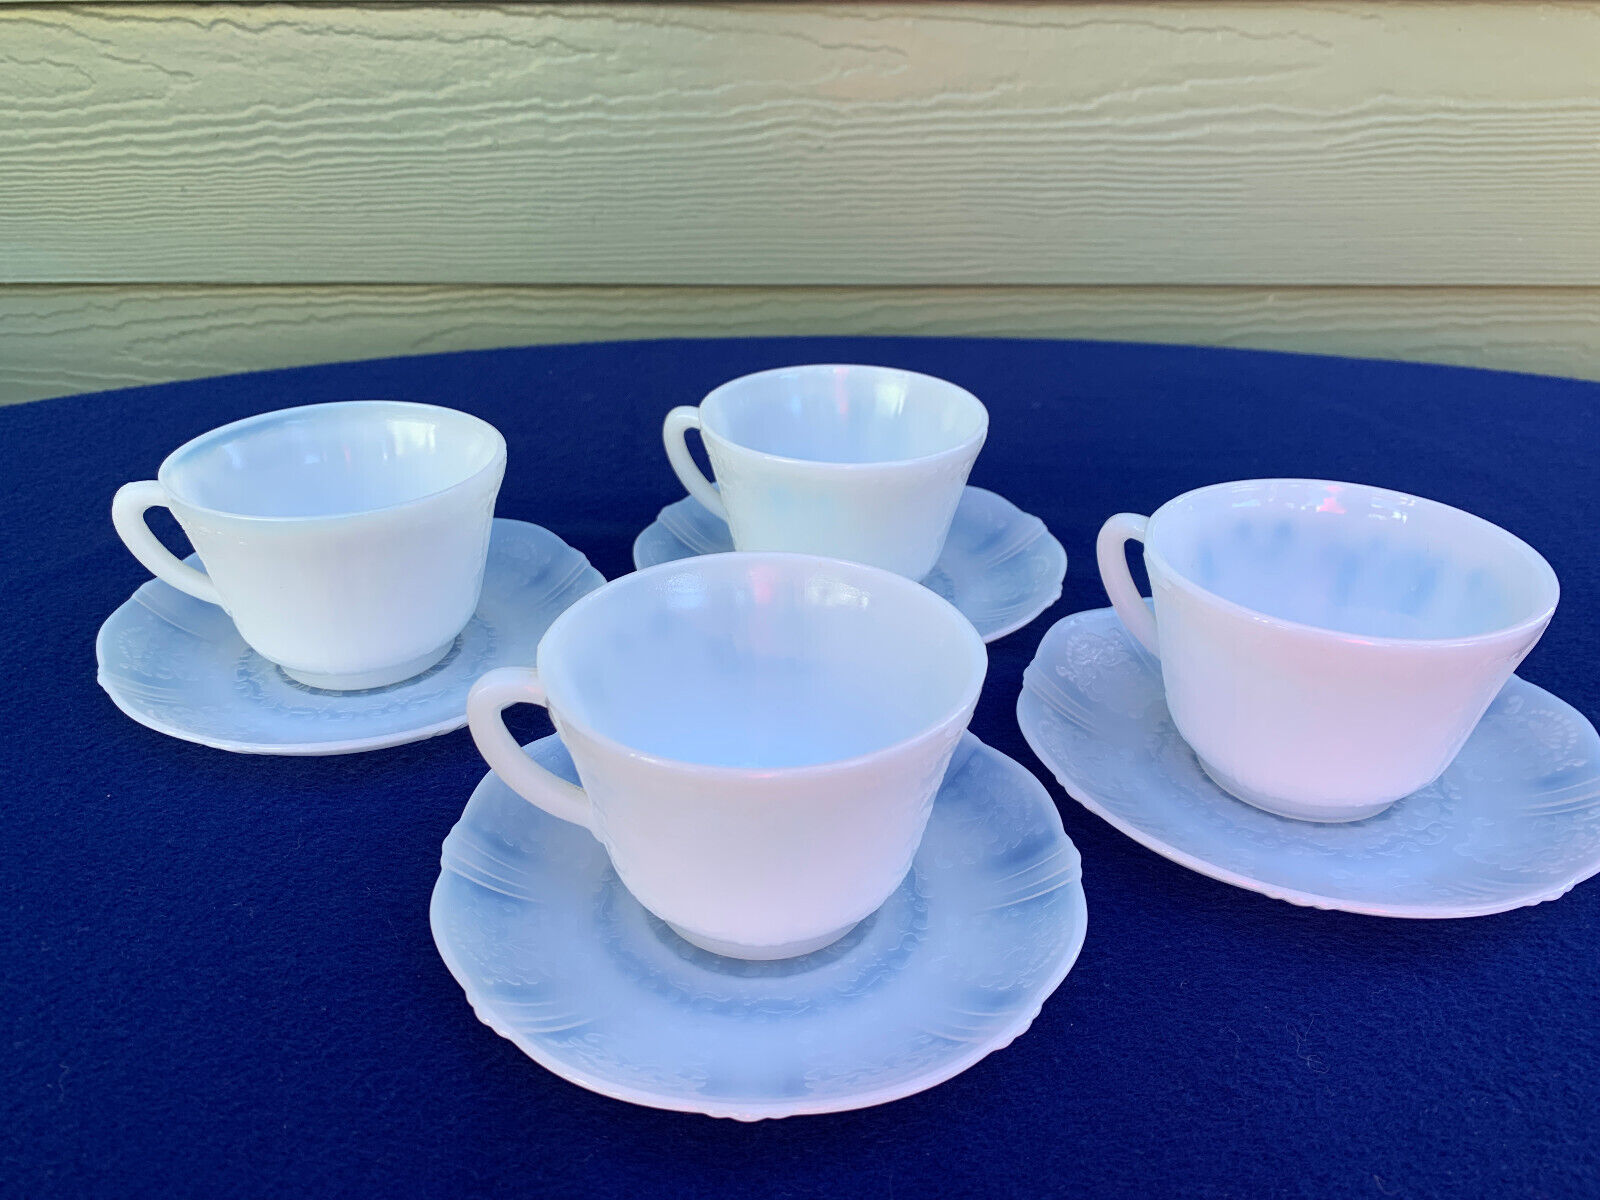 MacBeth Evans American Sweetheart 4 monax cup and saucer sets